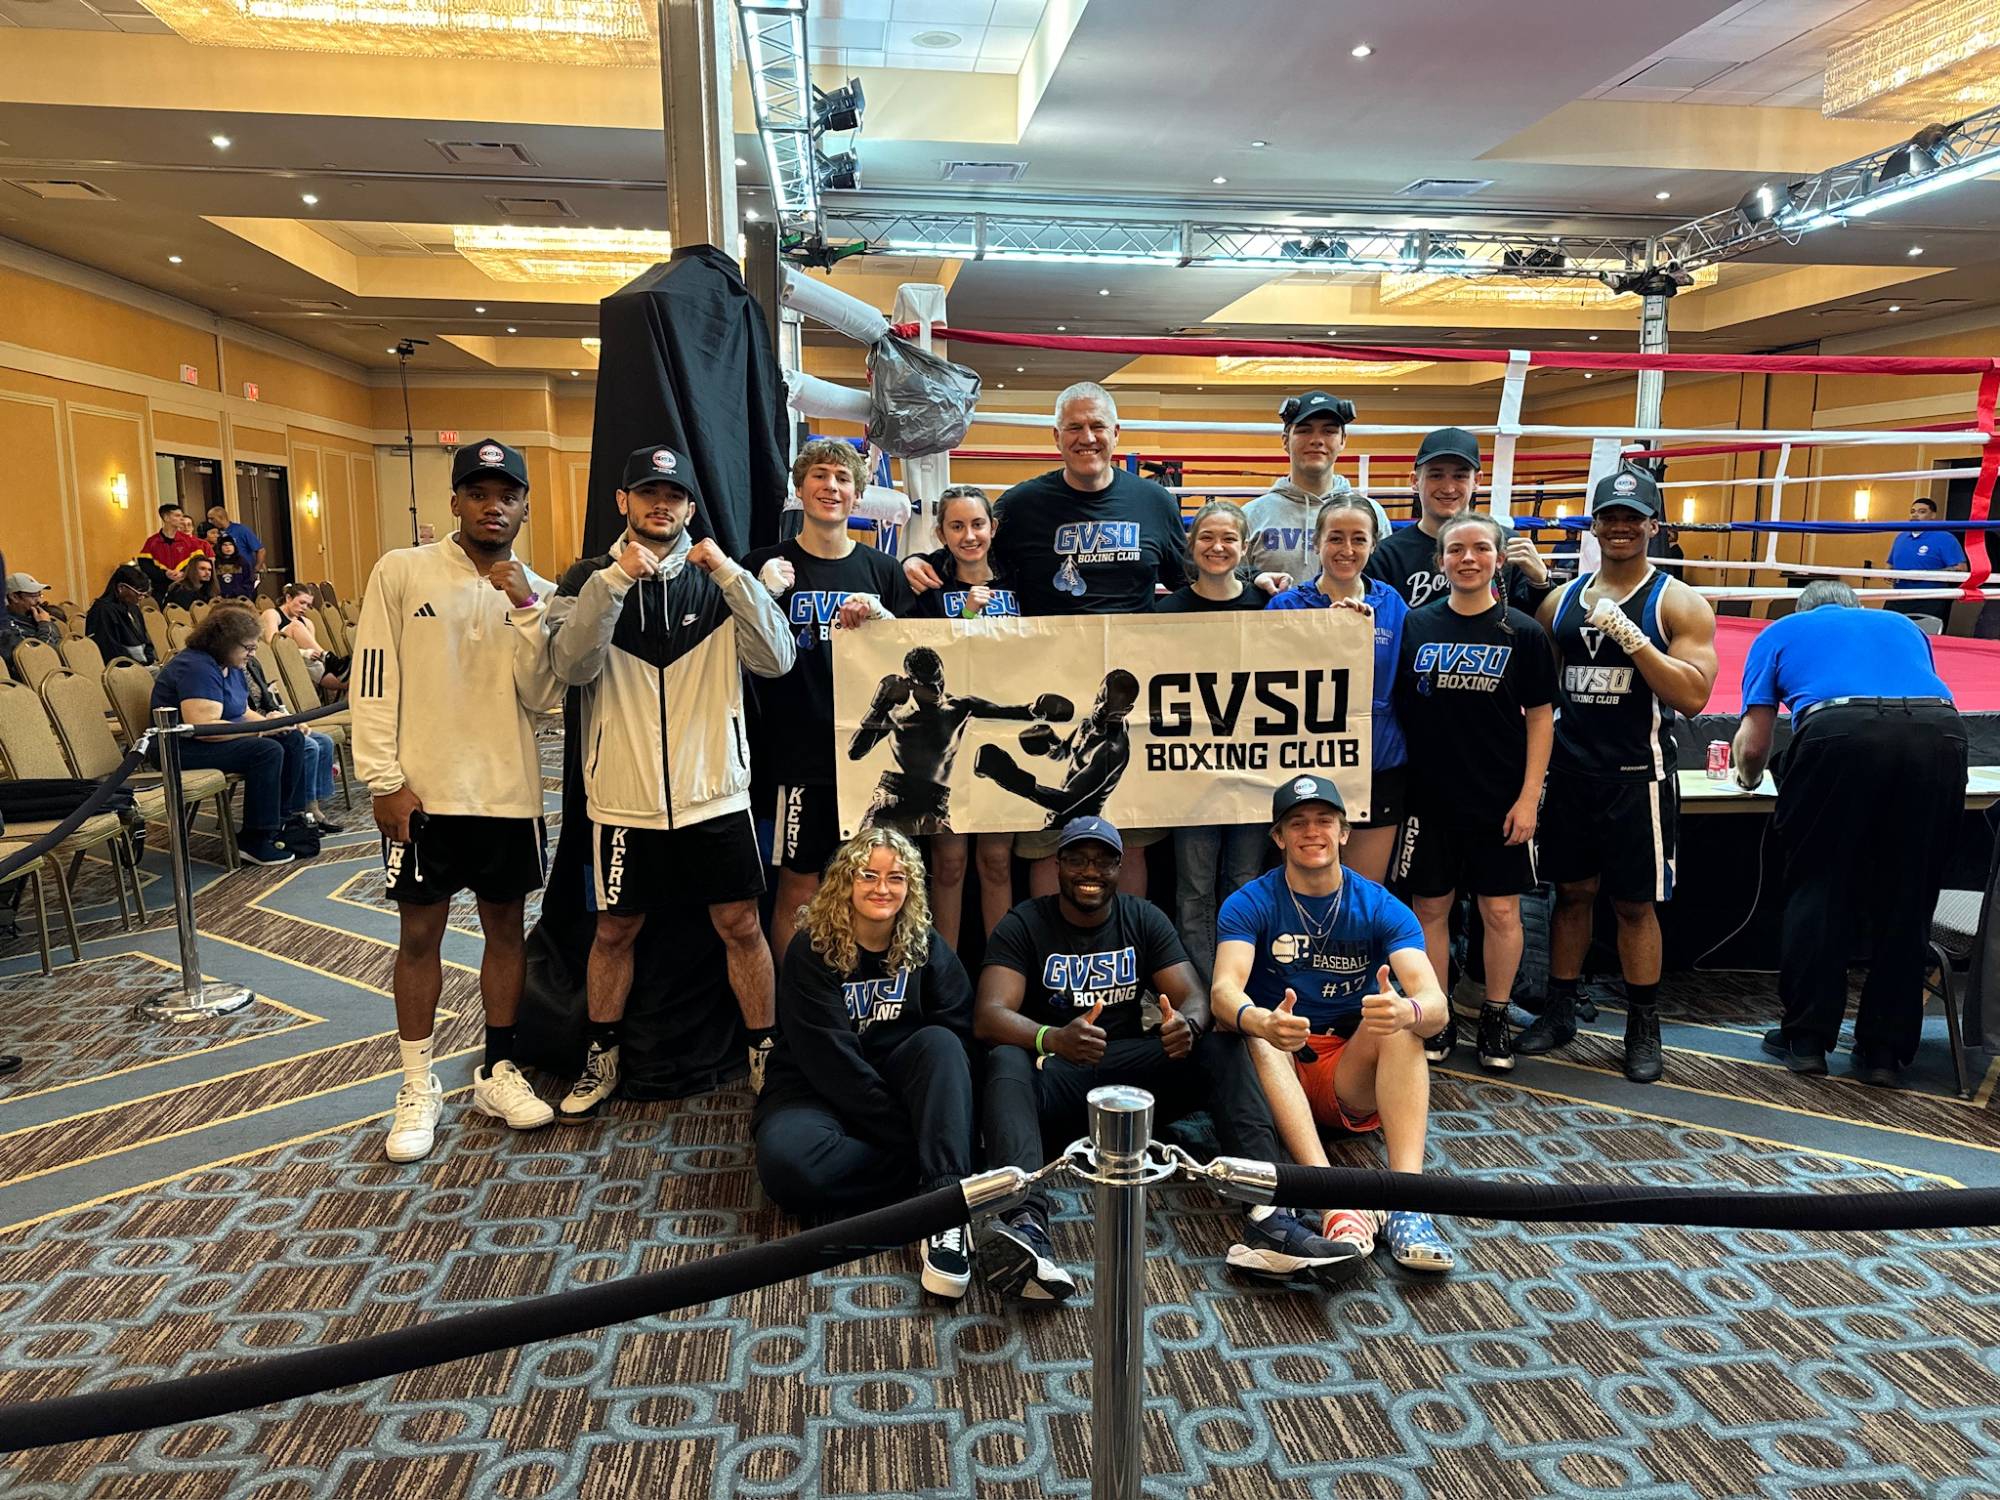 Out of 34 schools GV's Boxing team took 3rd and 10th place in the men's and women's divisions, respectively, with only 9 fighters total